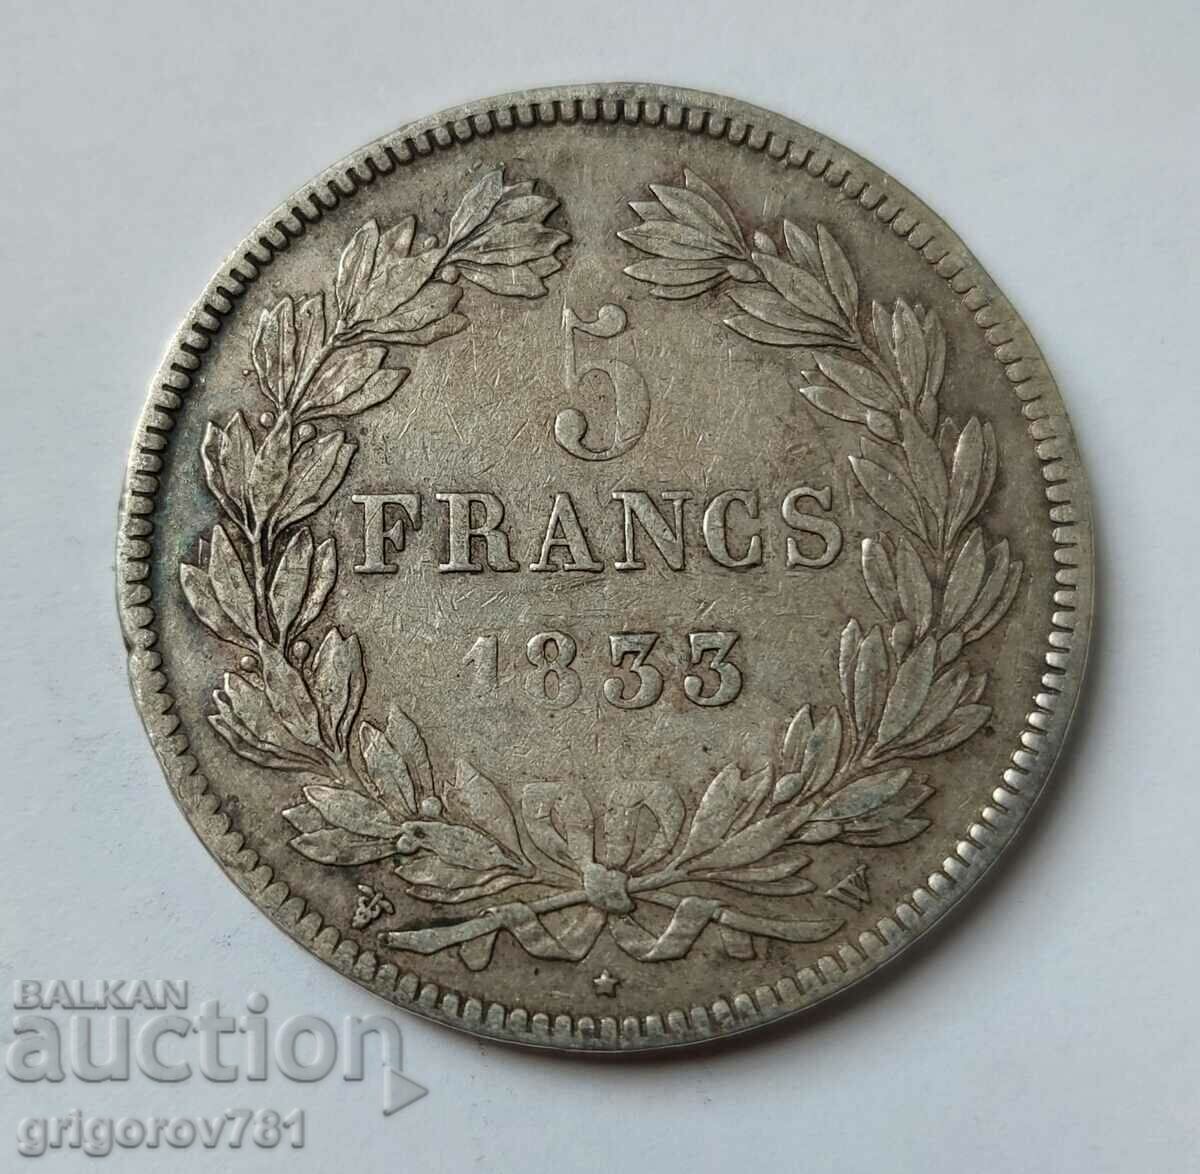 5 Francs Silver France 1833 W - Silver Coin #118